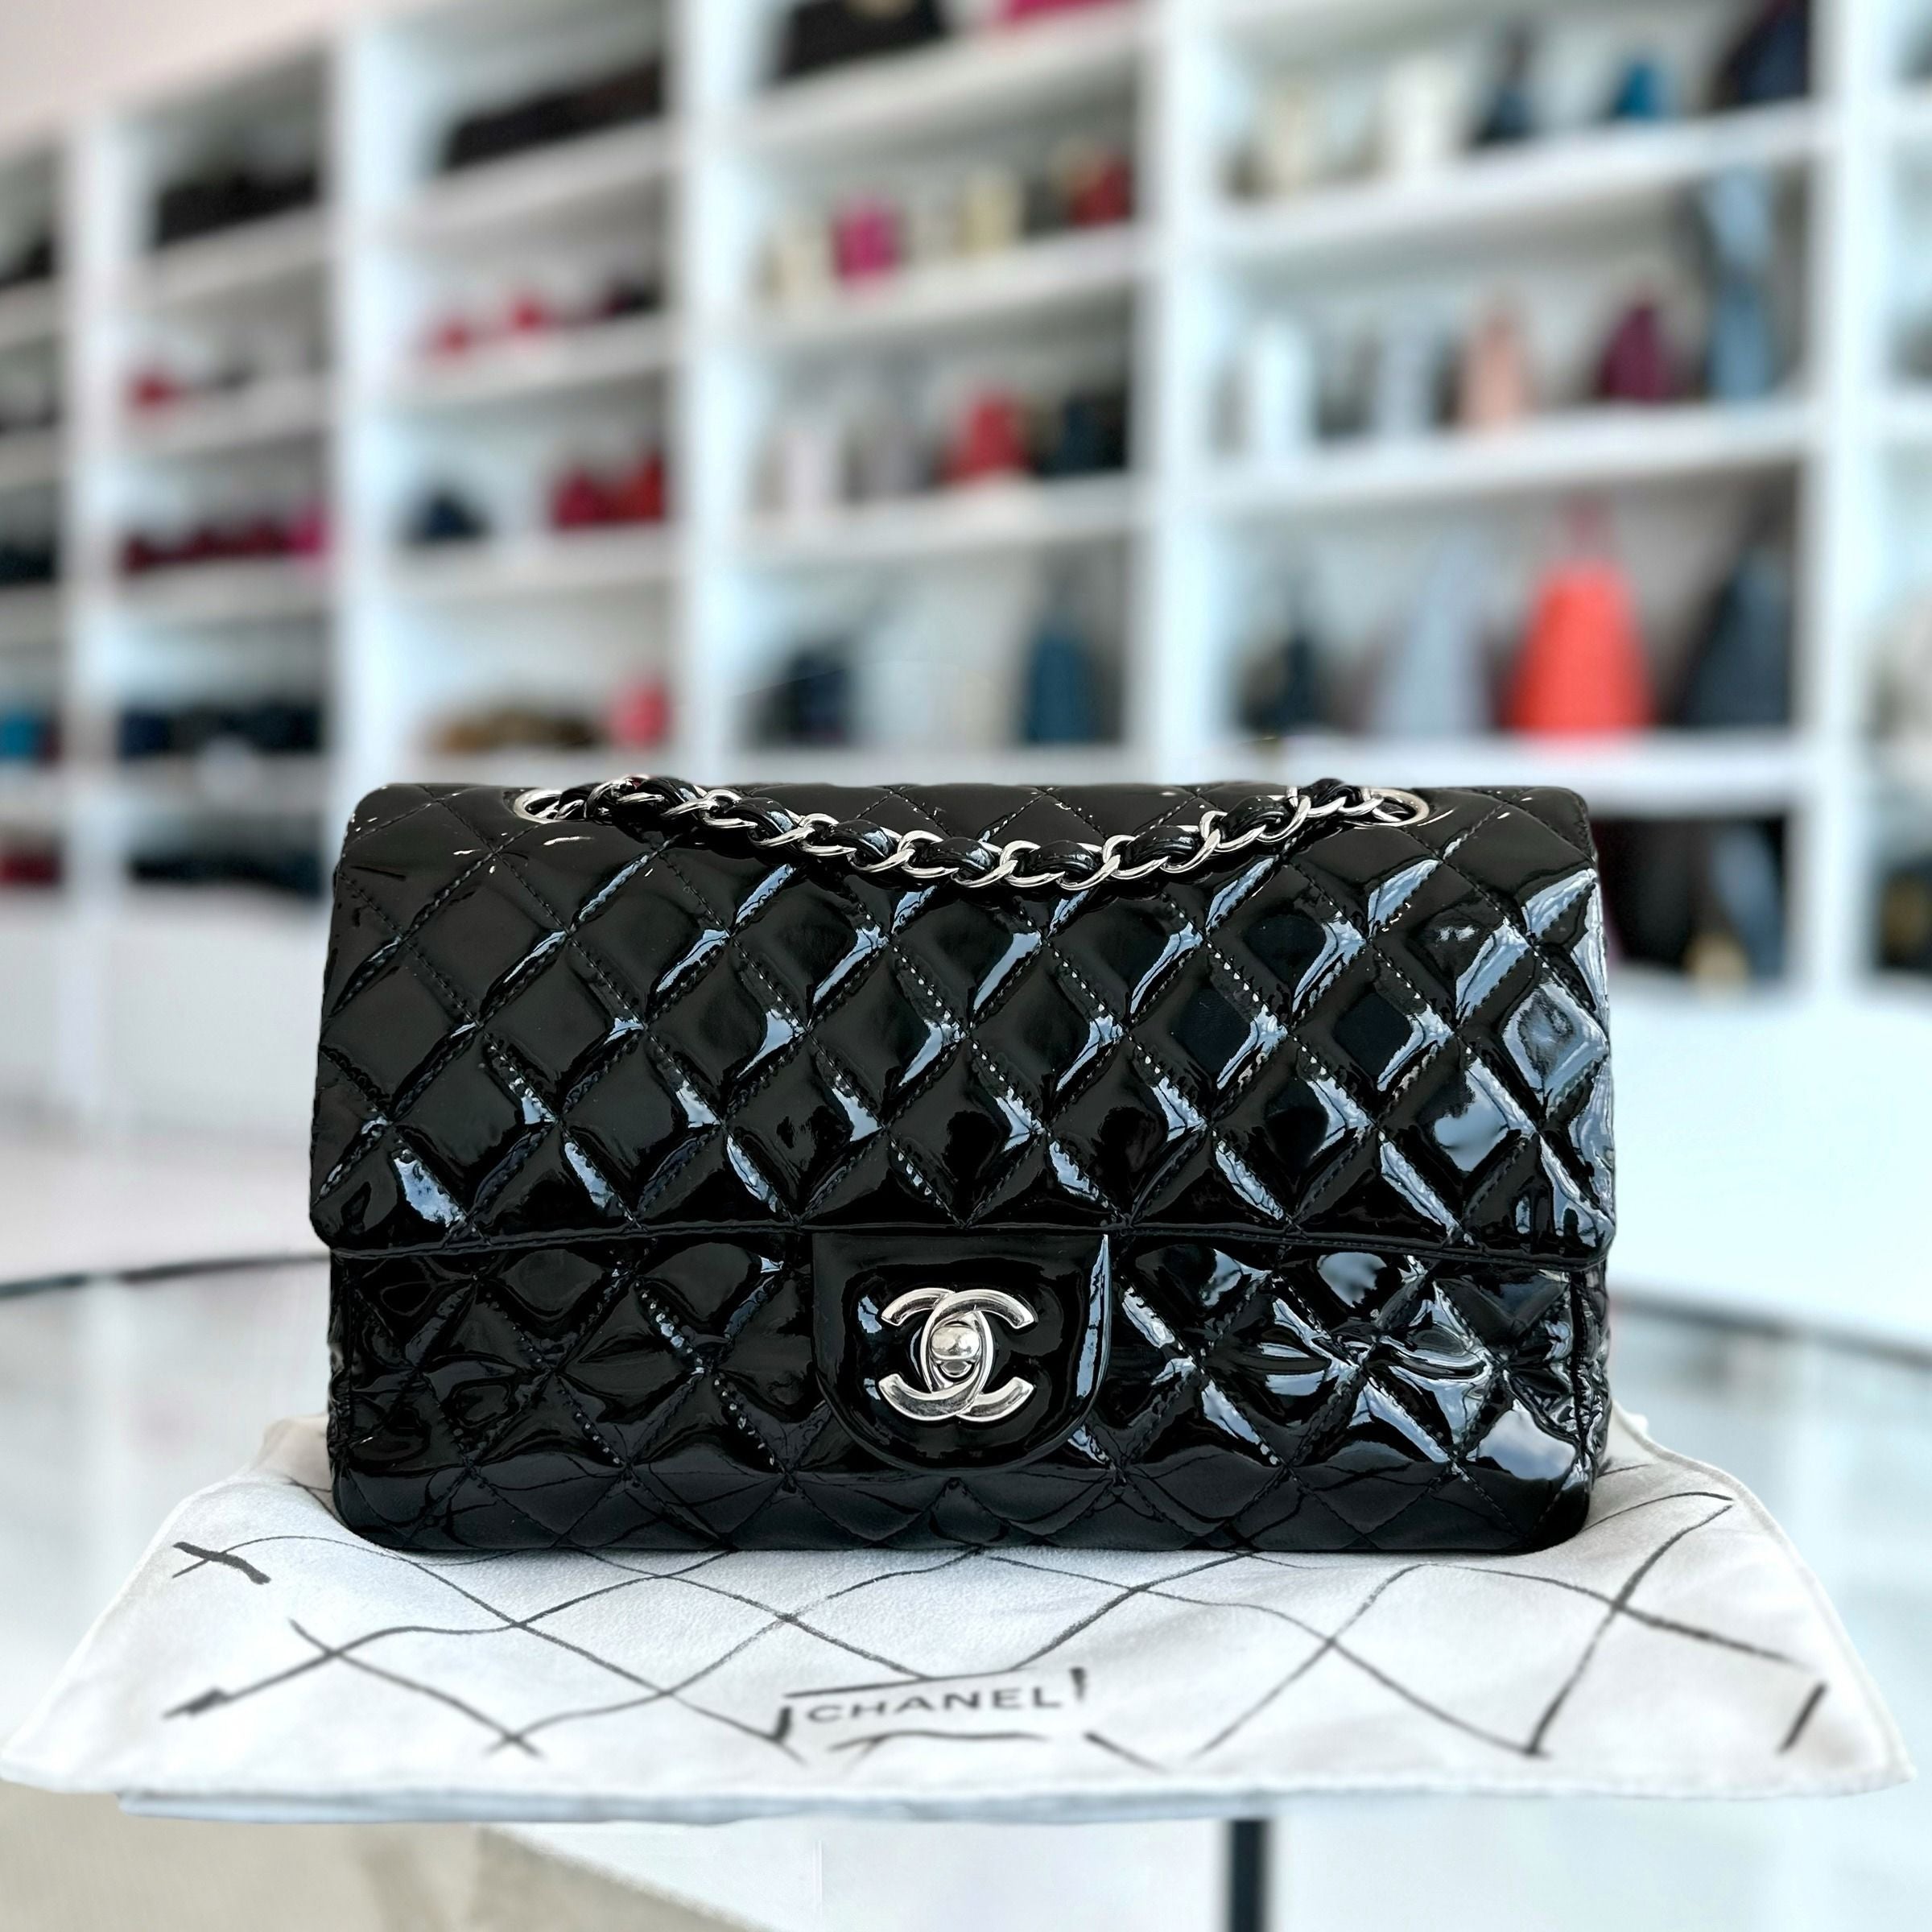 Chanel Medium Classic Flap Patent Leather Quilted Black SHW No 18